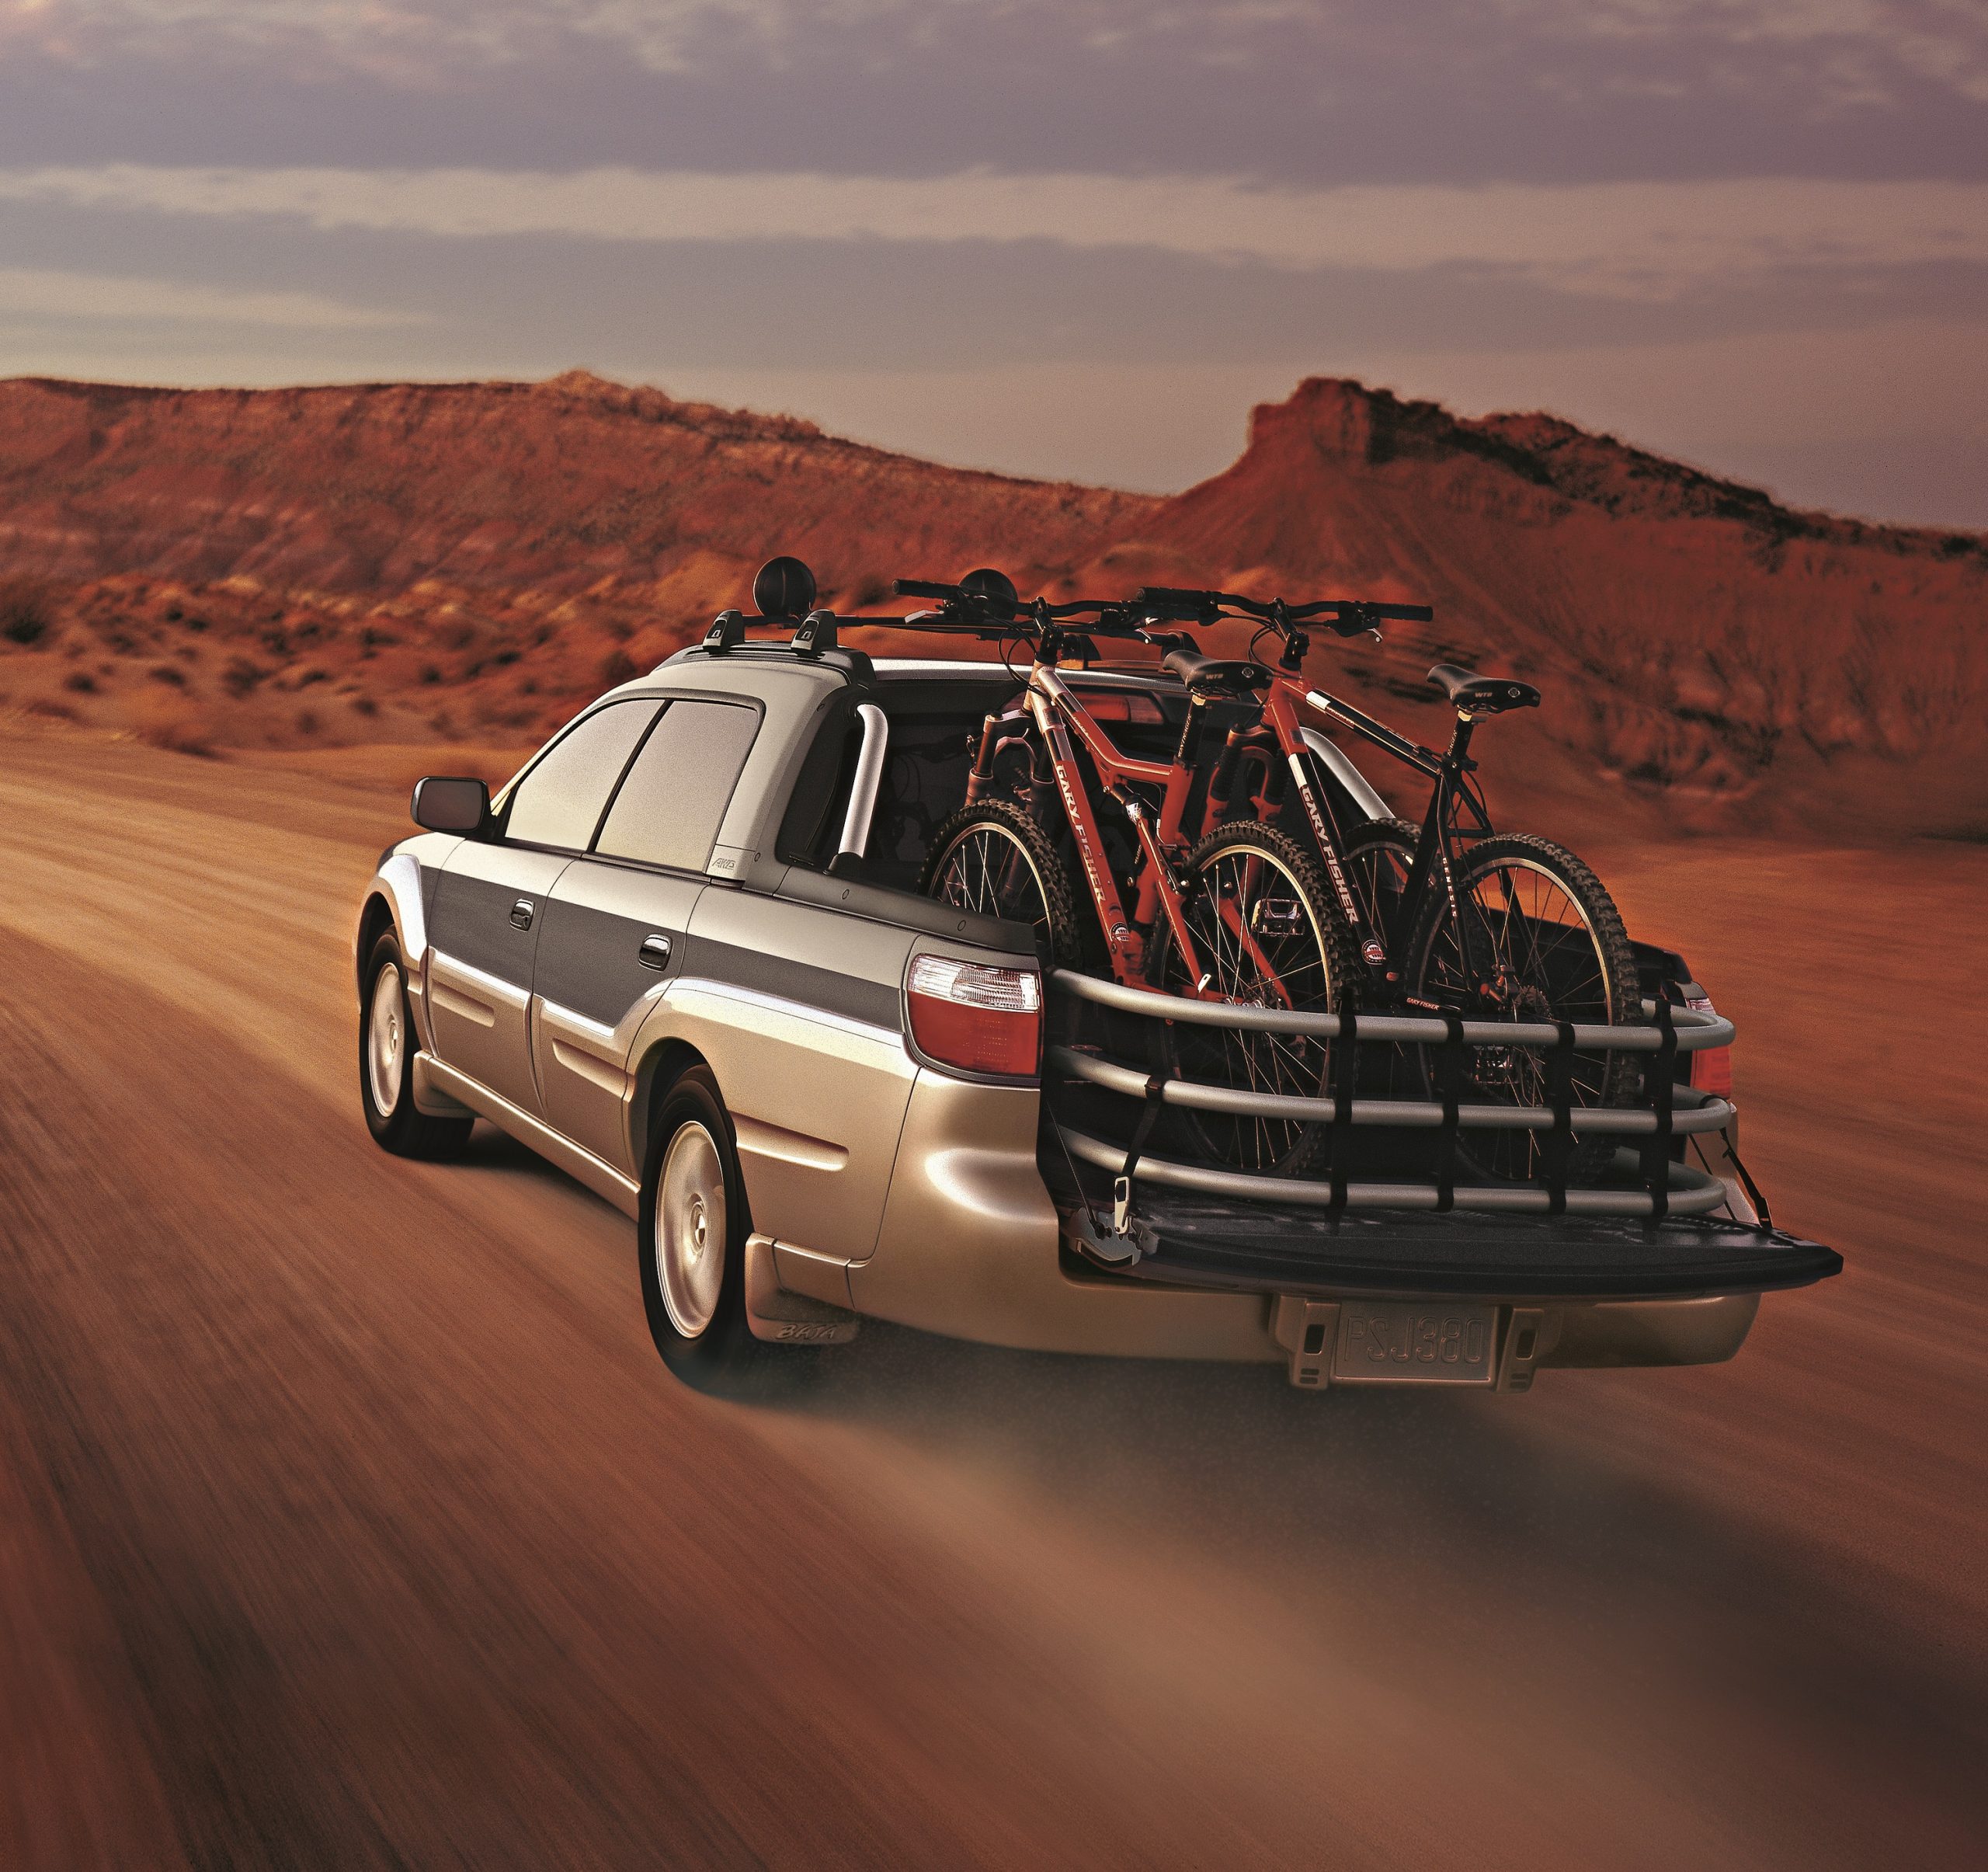 The rear of a Subaru Baja loaded with mountain bikes on a desert back road